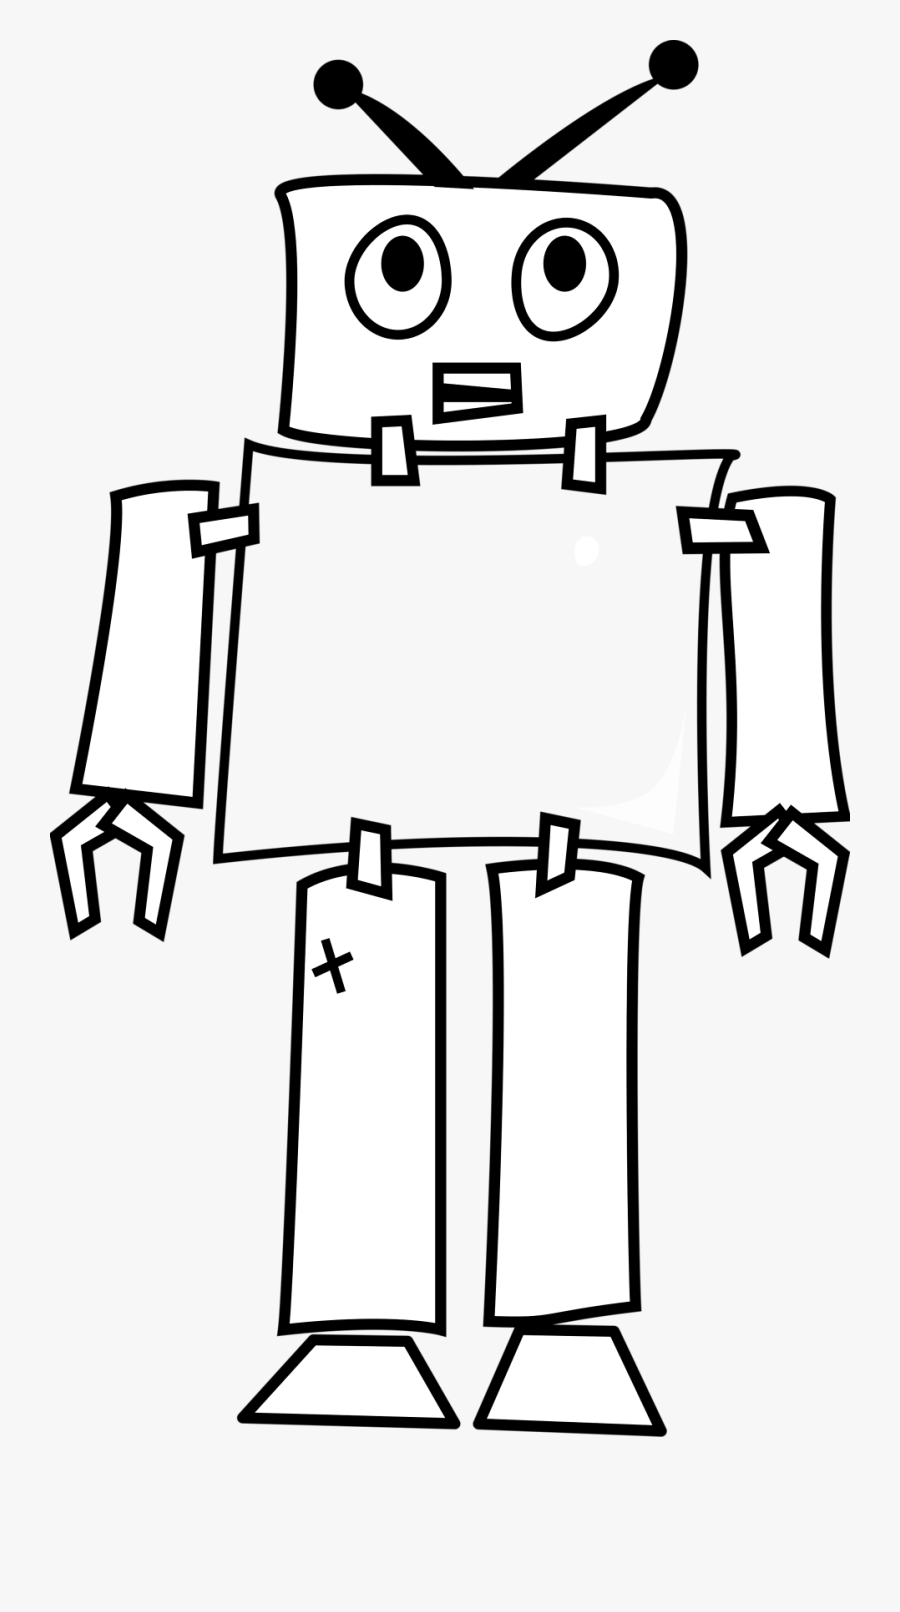 Simple Drawing Of Robot - Robot Black And White Clipart, Transparent Clipart